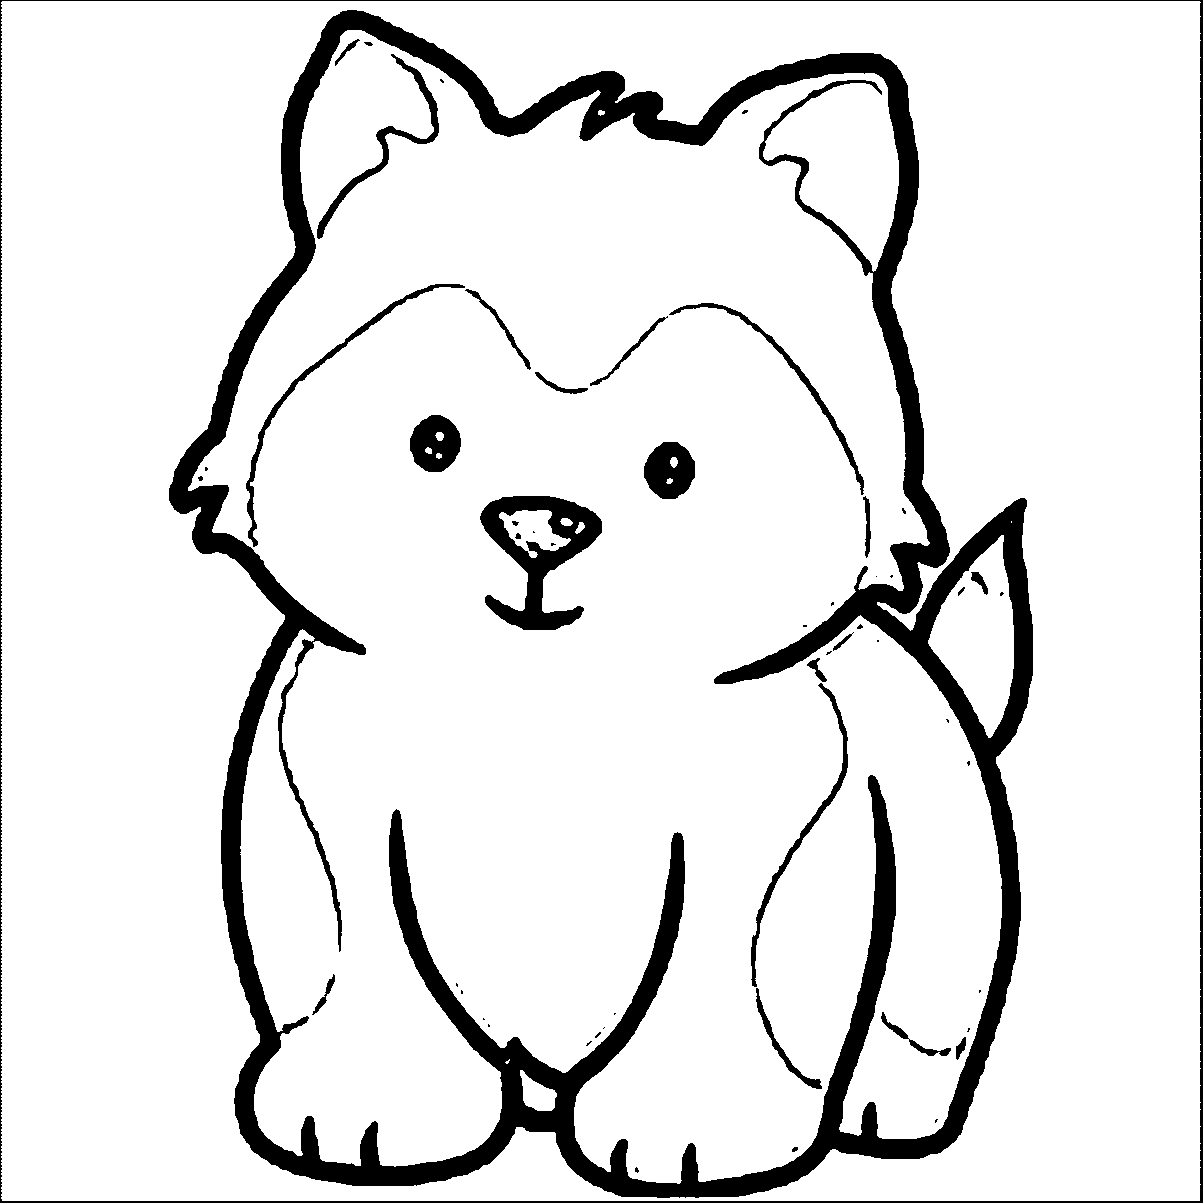 Husky Coloring Pages Siberian Husky Coloring Pages. Kids Coloring ...